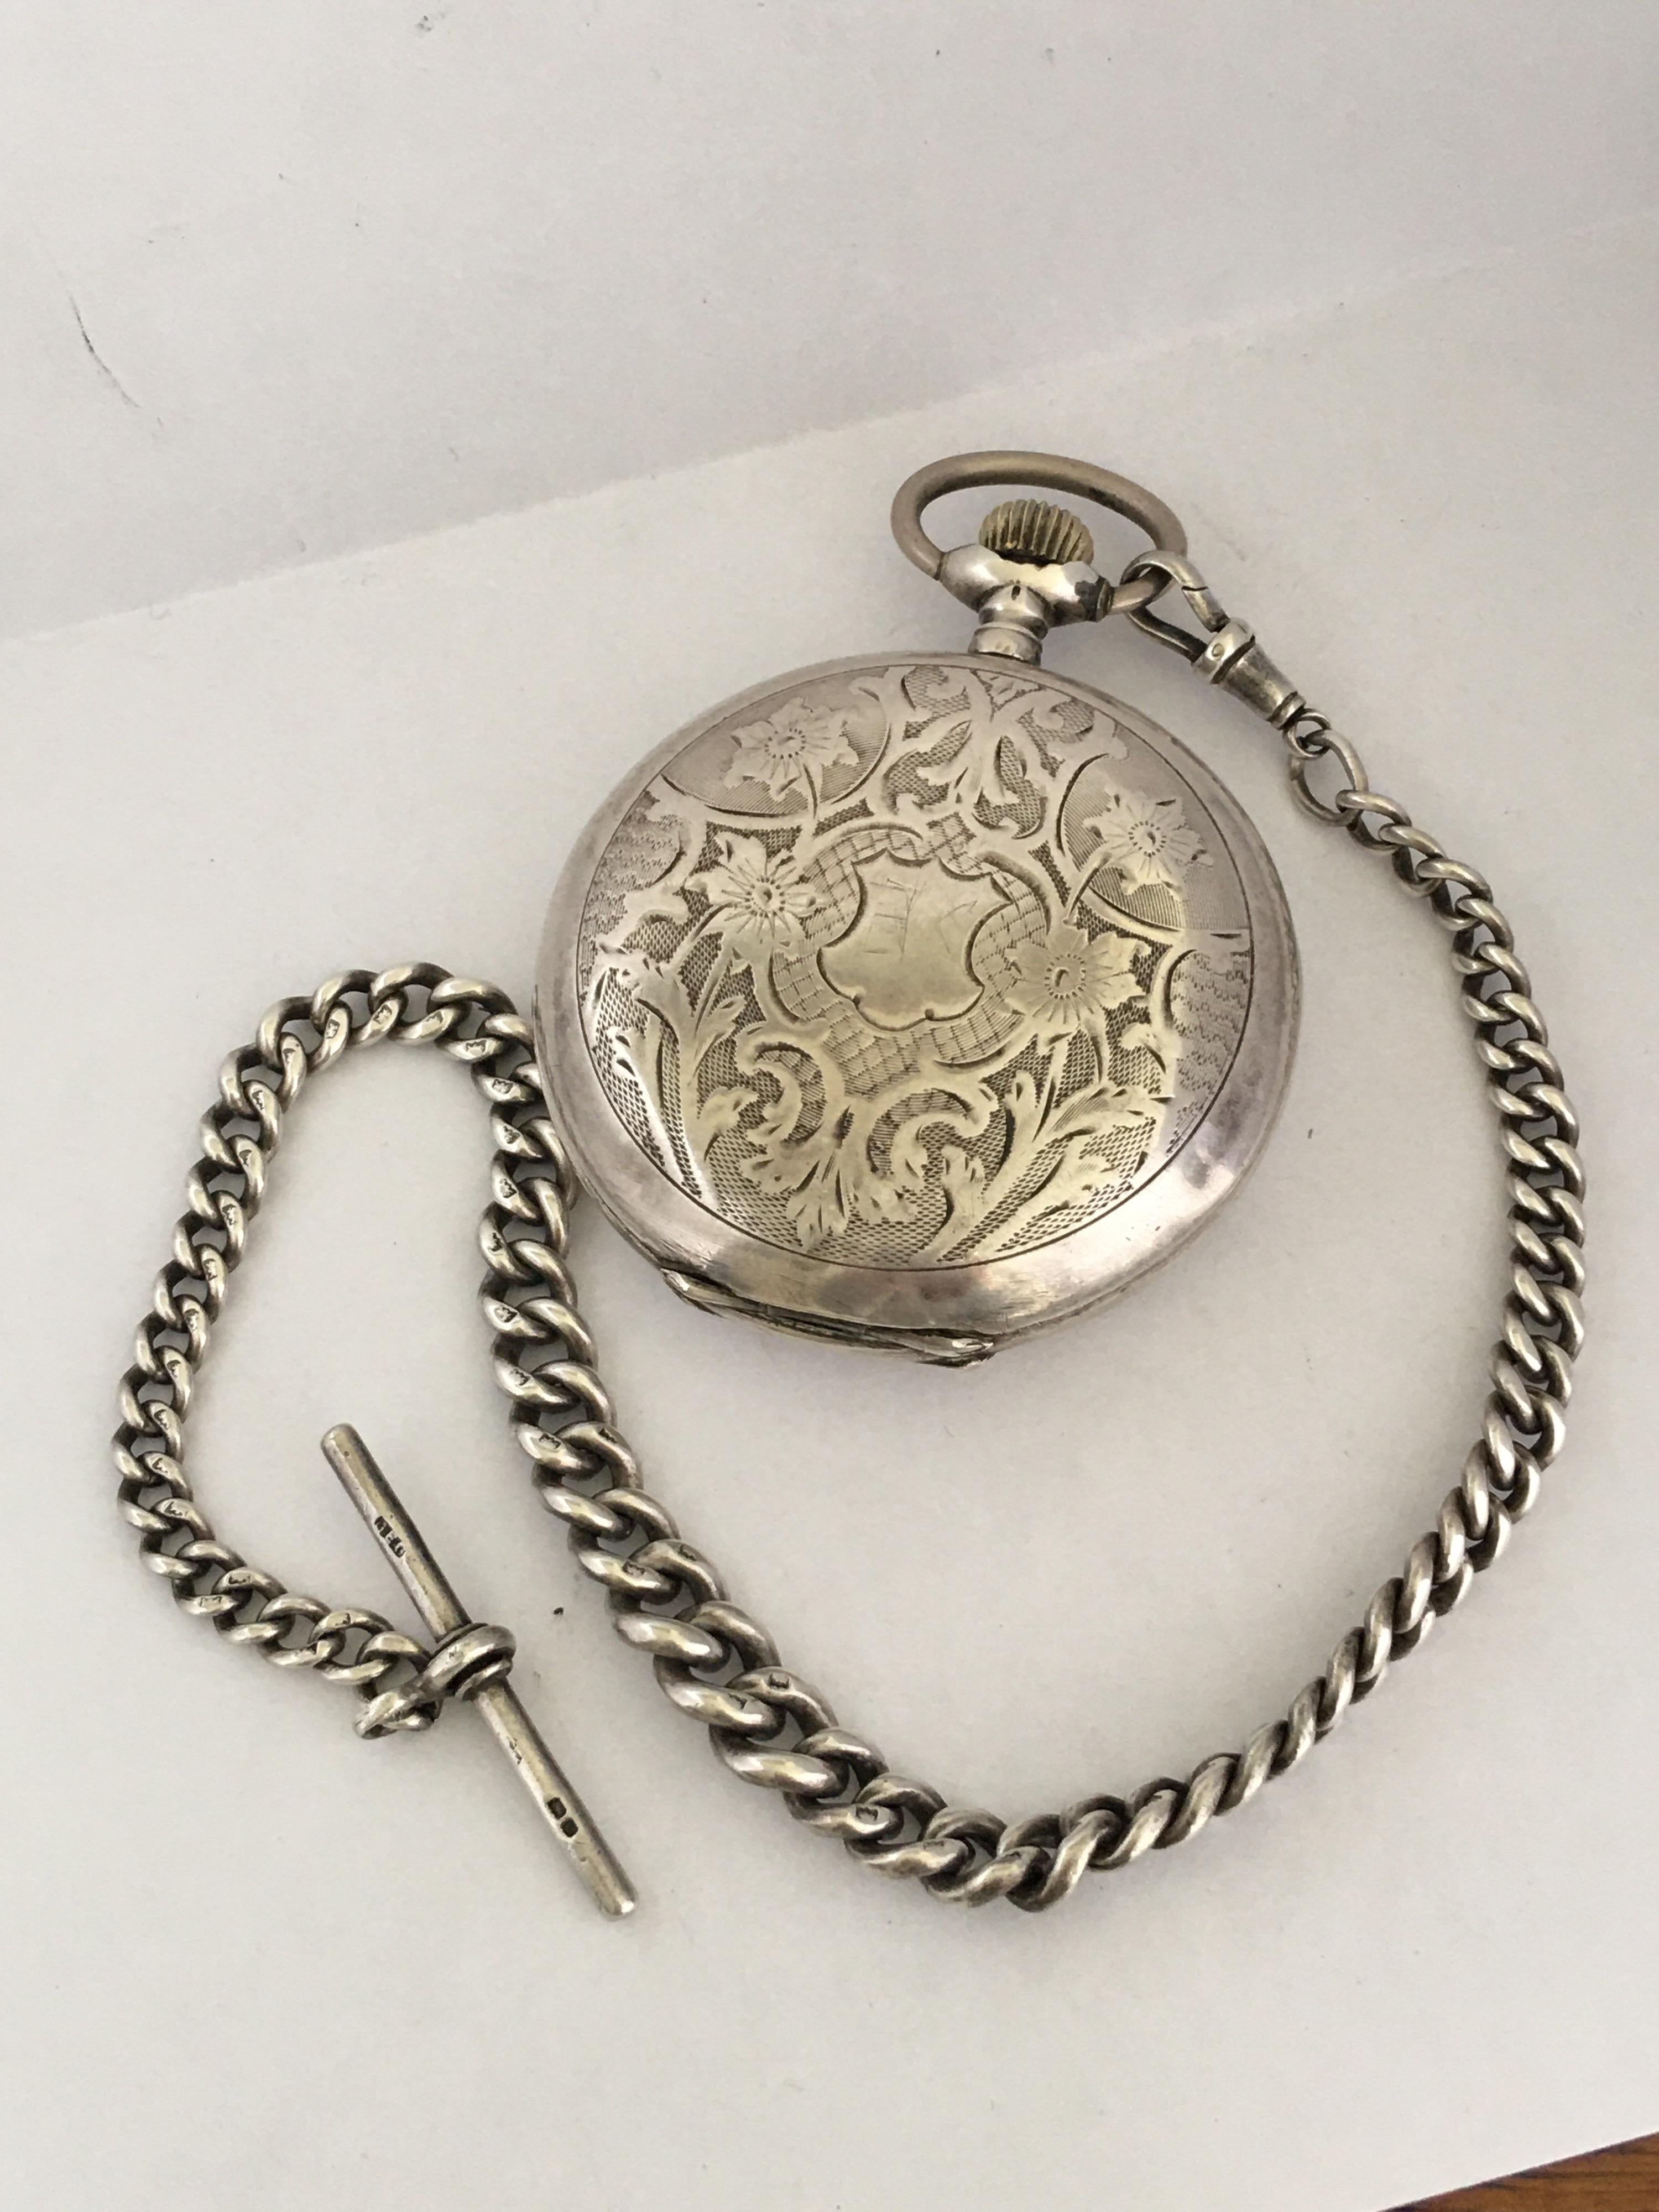 Antique Full Hunter Engraved Silver Pocket Watch Signed Udovic Watch Co. 9